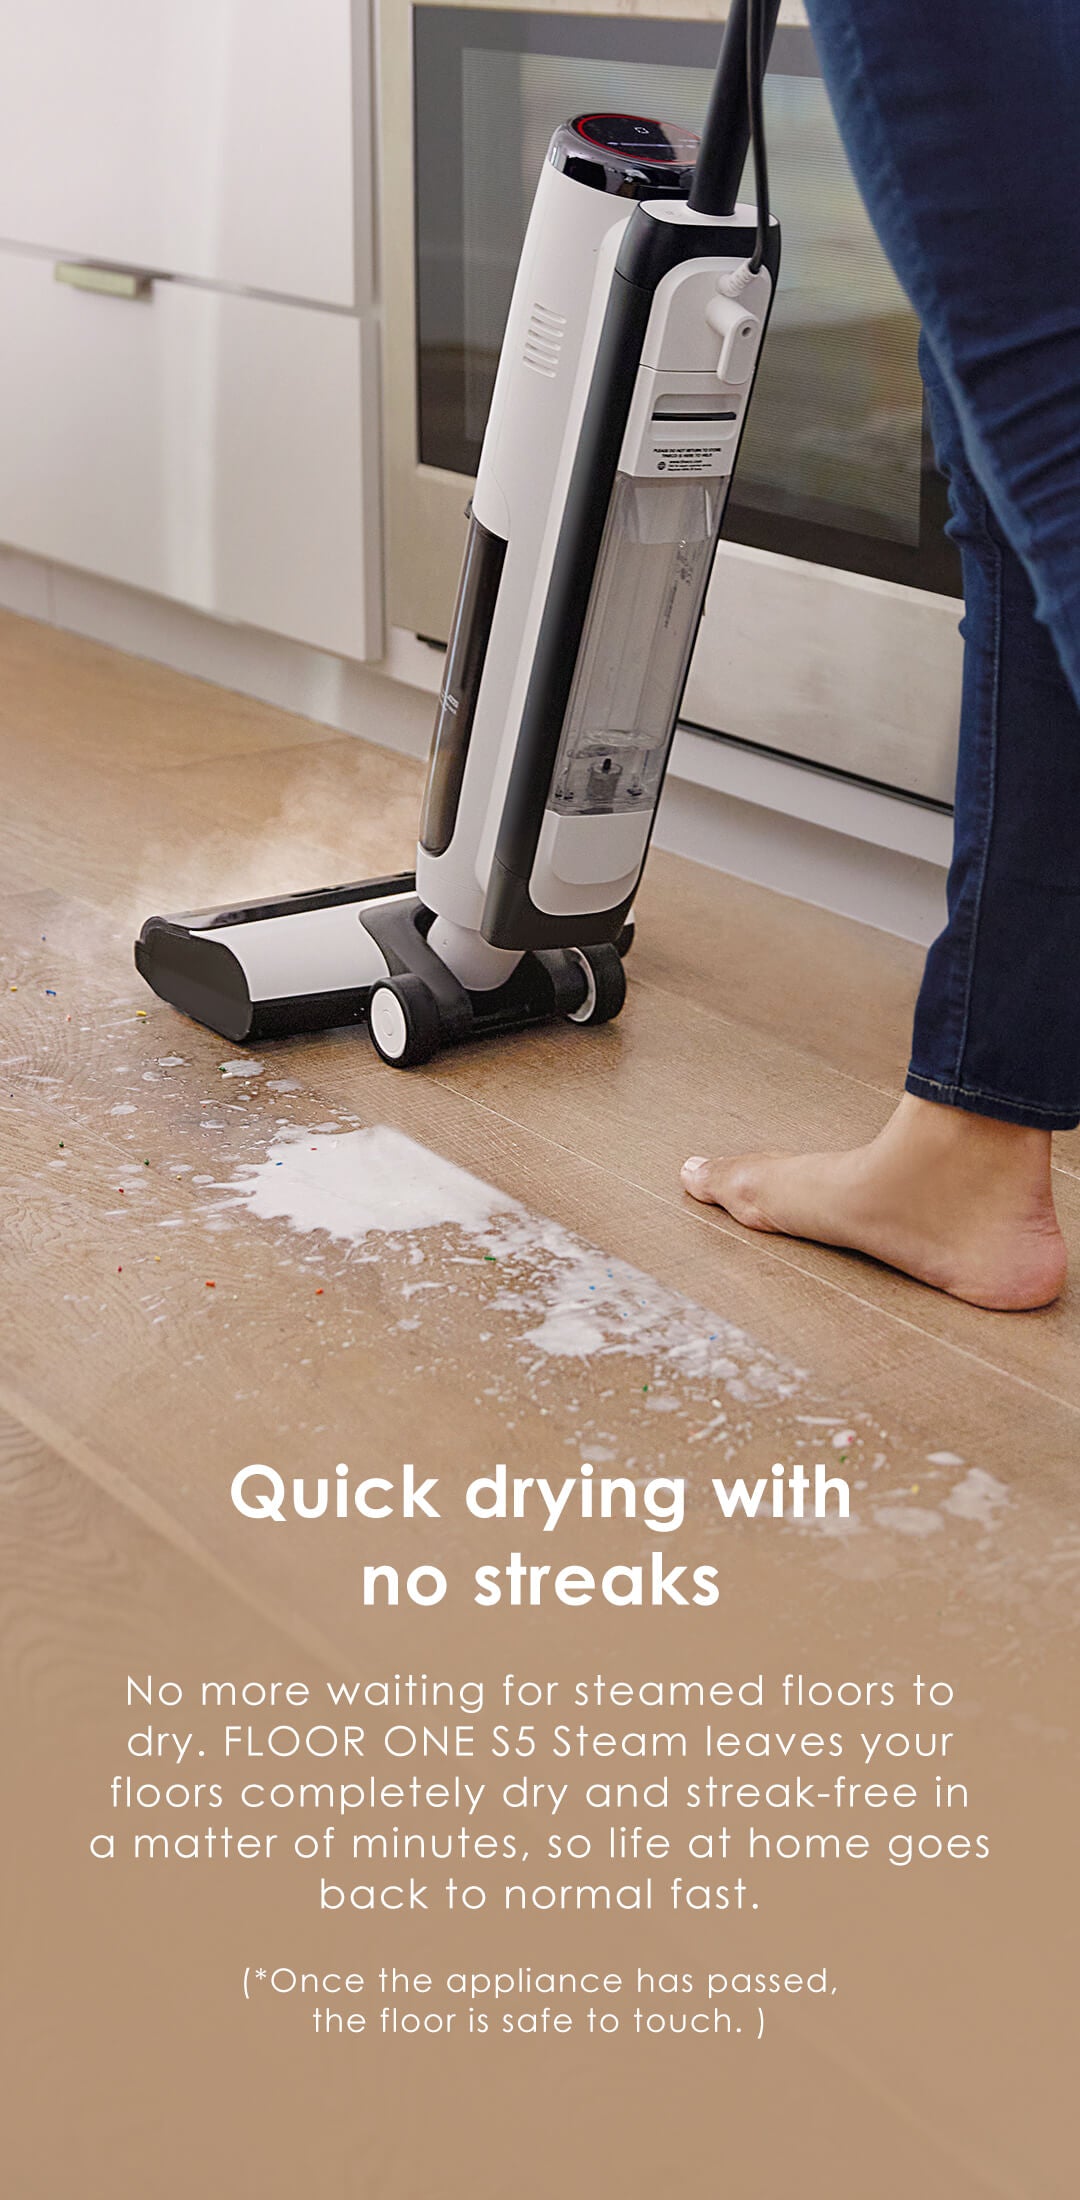  Tineco FLOOR ONE S5 Steam Cleaner Wet Dry Vacuum All-in-one,  Hardwood Floor Cleaner Great for Sticky Messes, Smart Steam Mop for Hard  Floors with Digital Display and Long Run Time